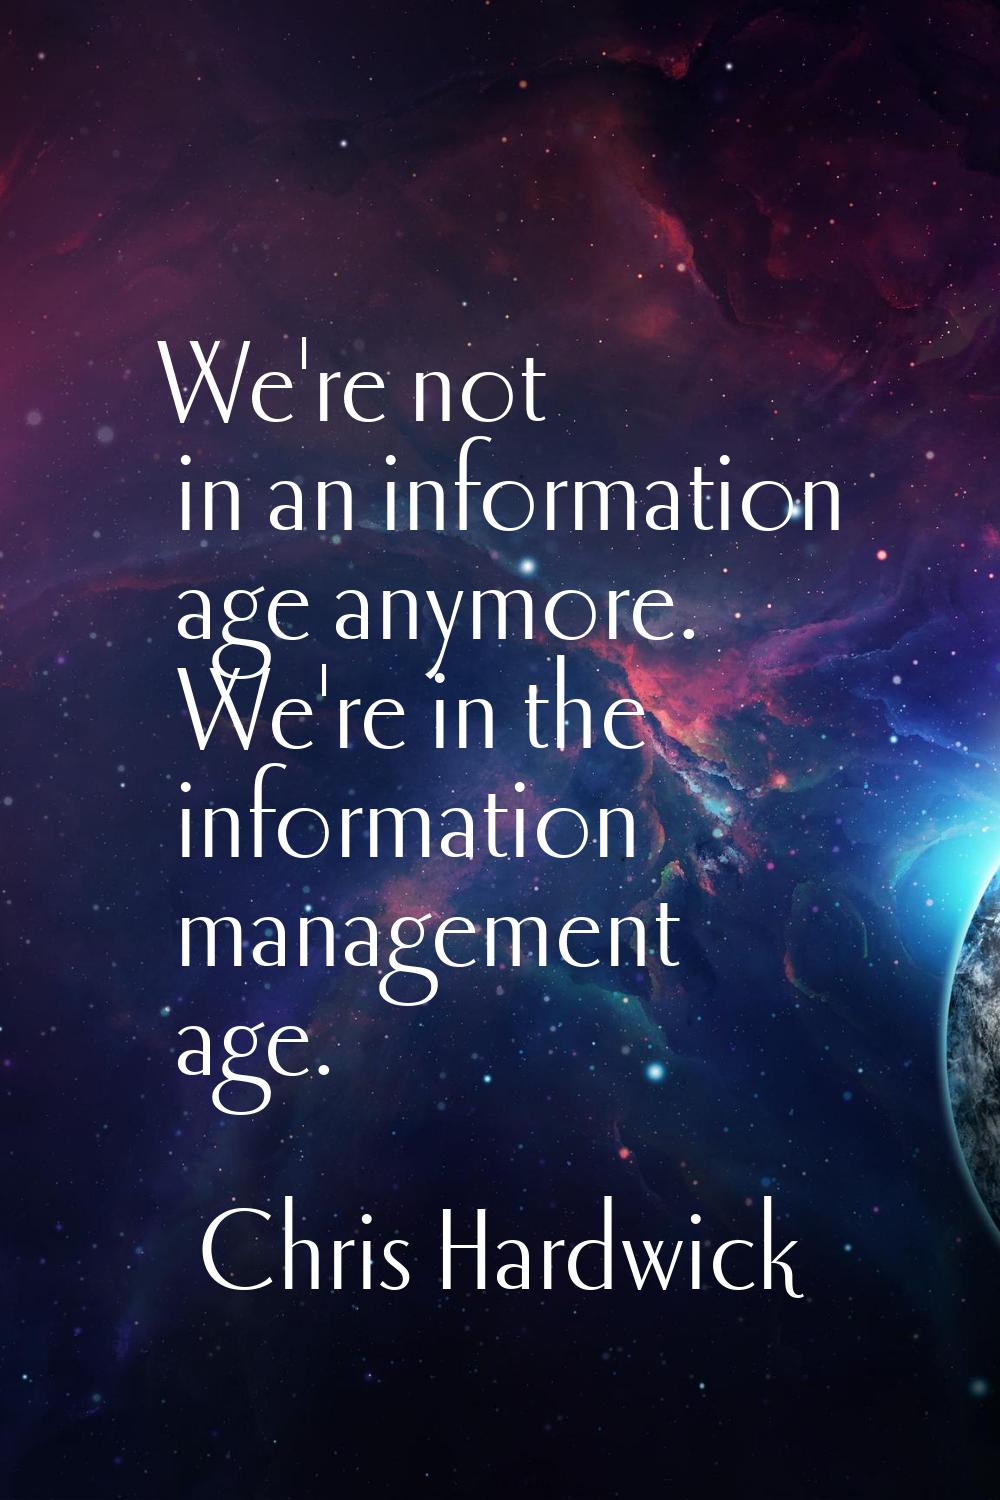 We're not in an information age anymore. We're in the information management age.